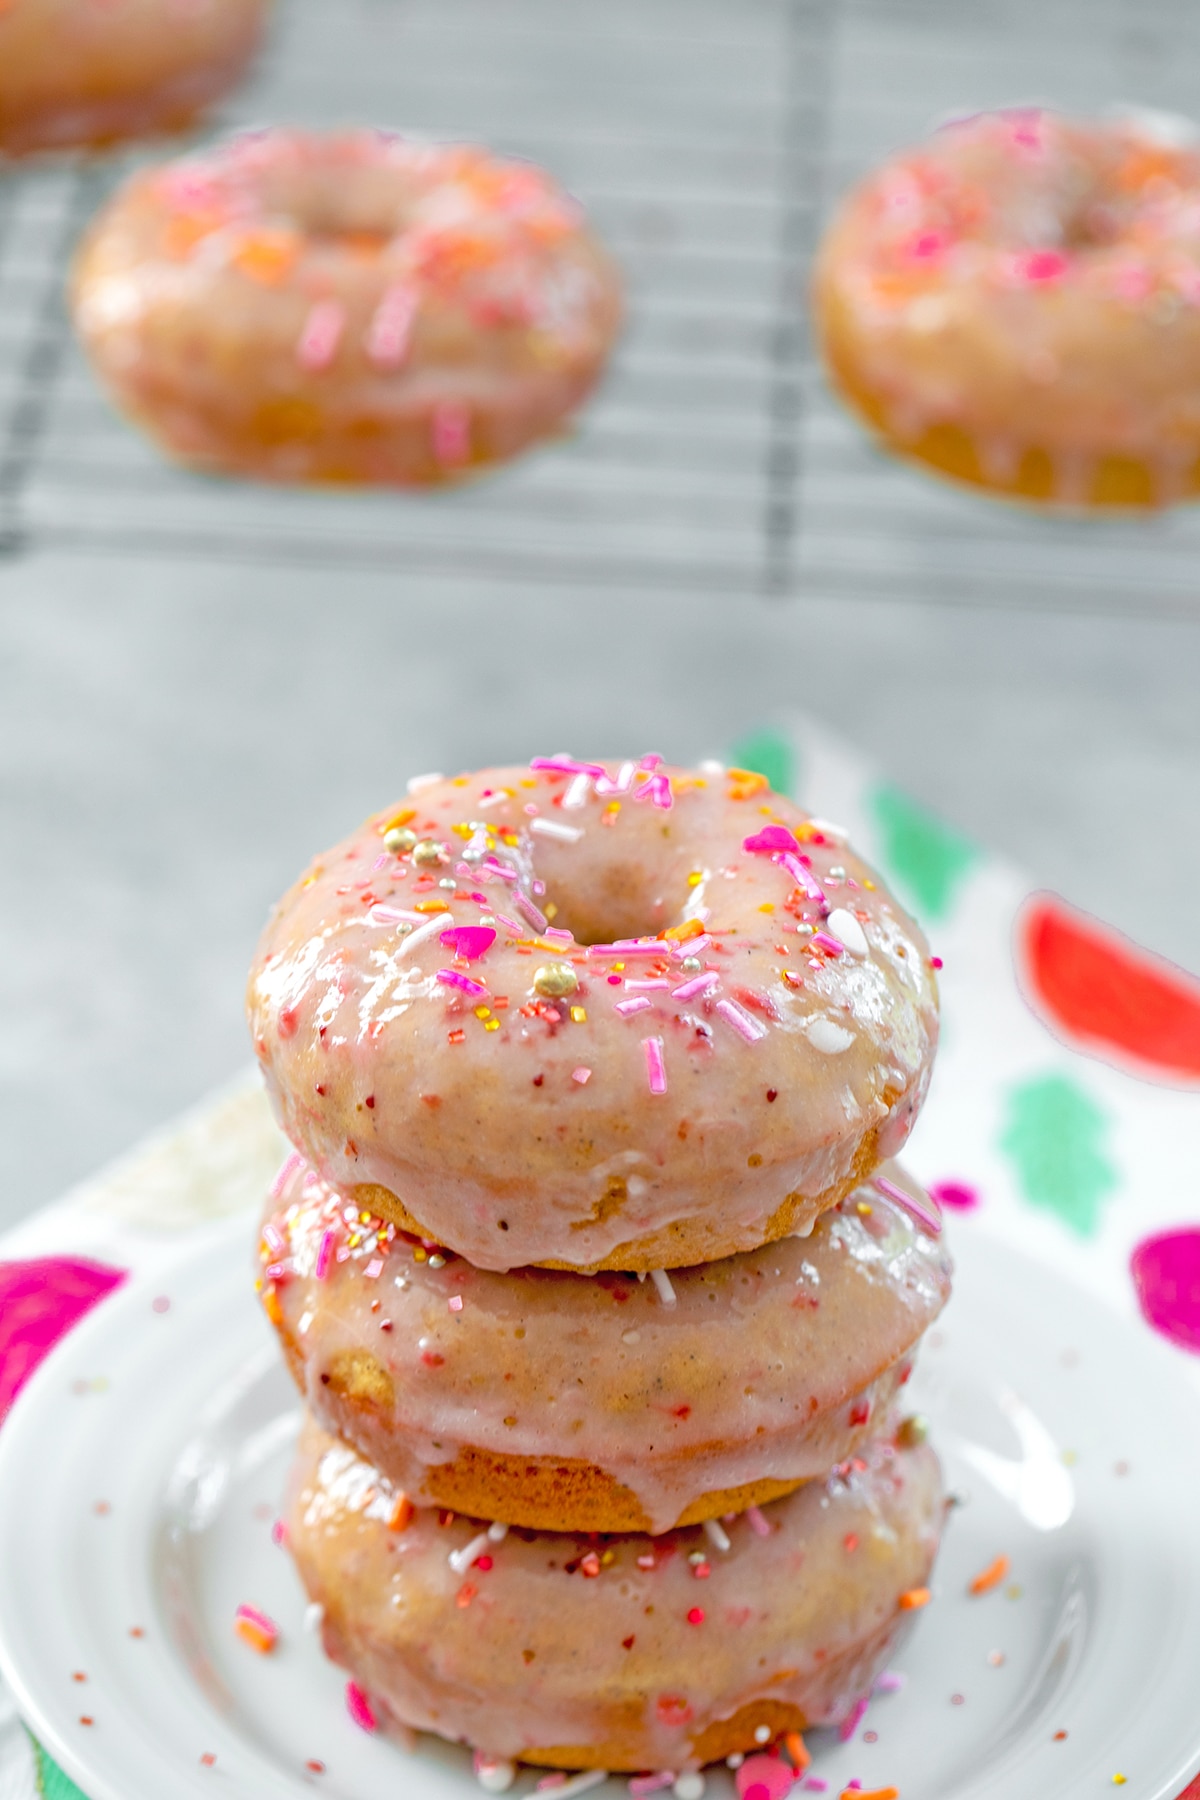 Head-on view of a stack of three strawberry frosted donuts covered in sprinkles on a white plate with a metal rack with more donuts on it in the background.